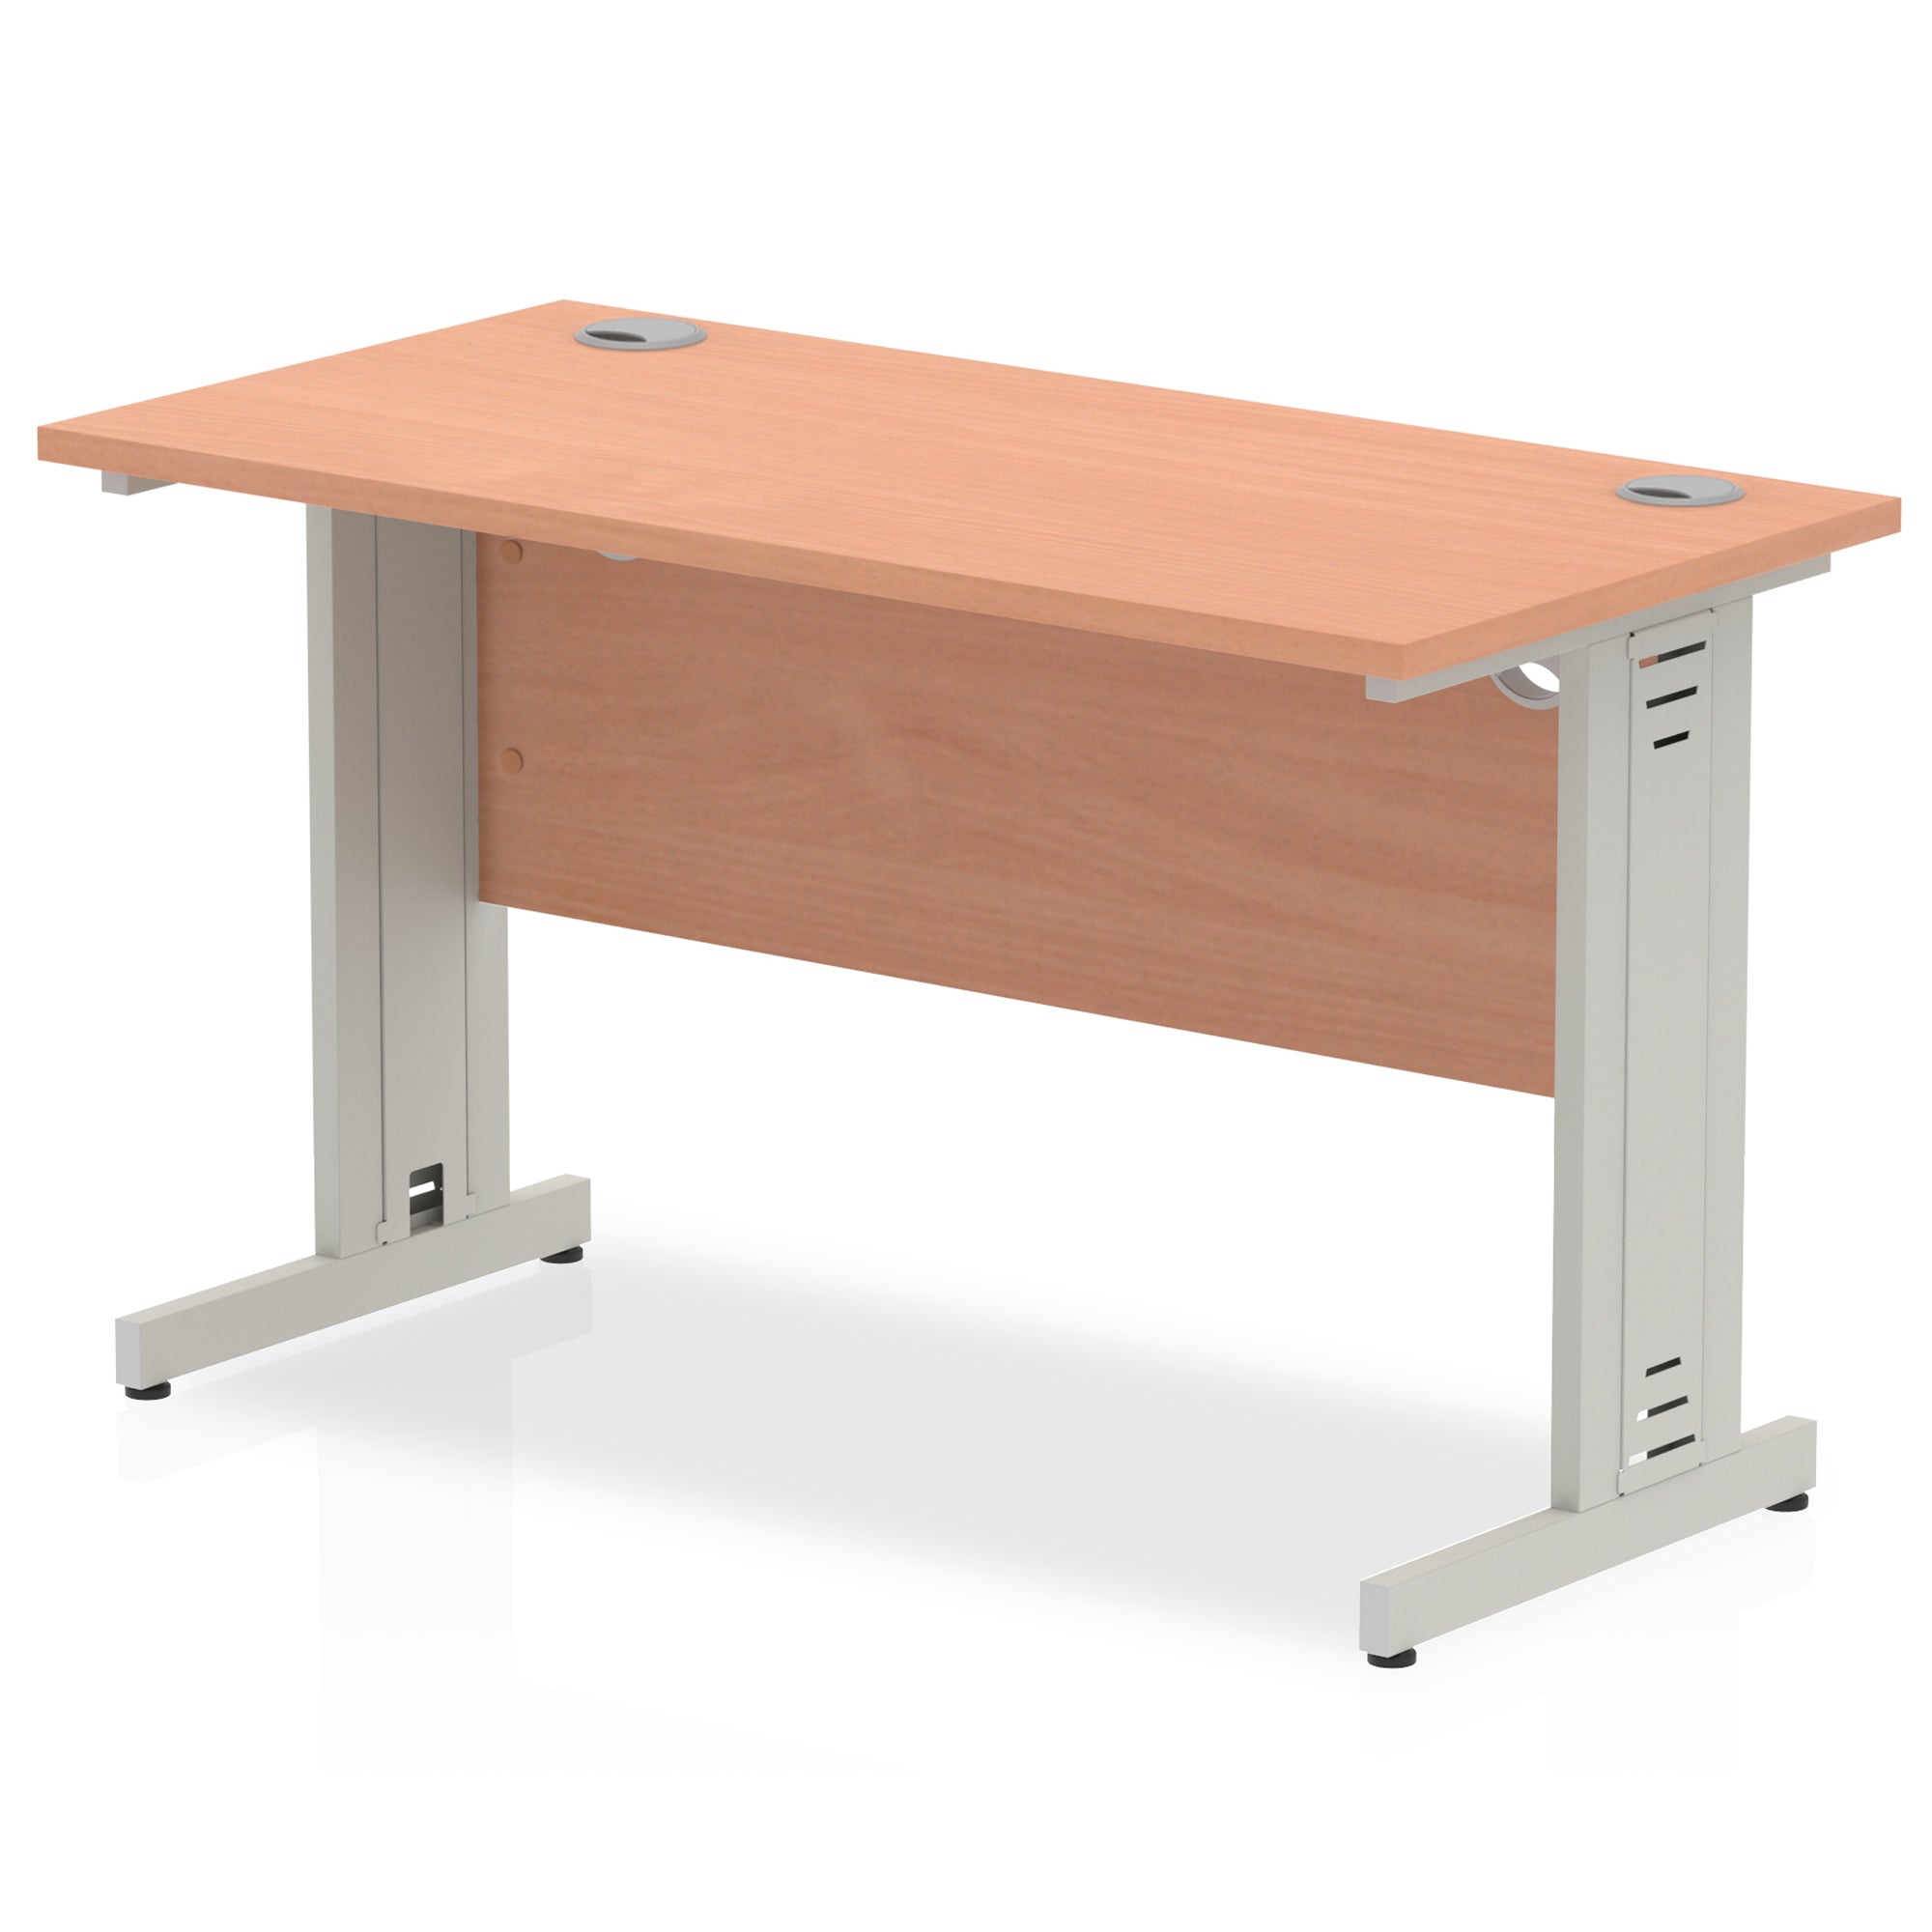 Impulse 1200mm Slimline Desk with Cable Managed Leg - MFC Rectangular Table, Self-Assembly, 5-Year Guarantee, 1200x600x730mm, 28.4kg